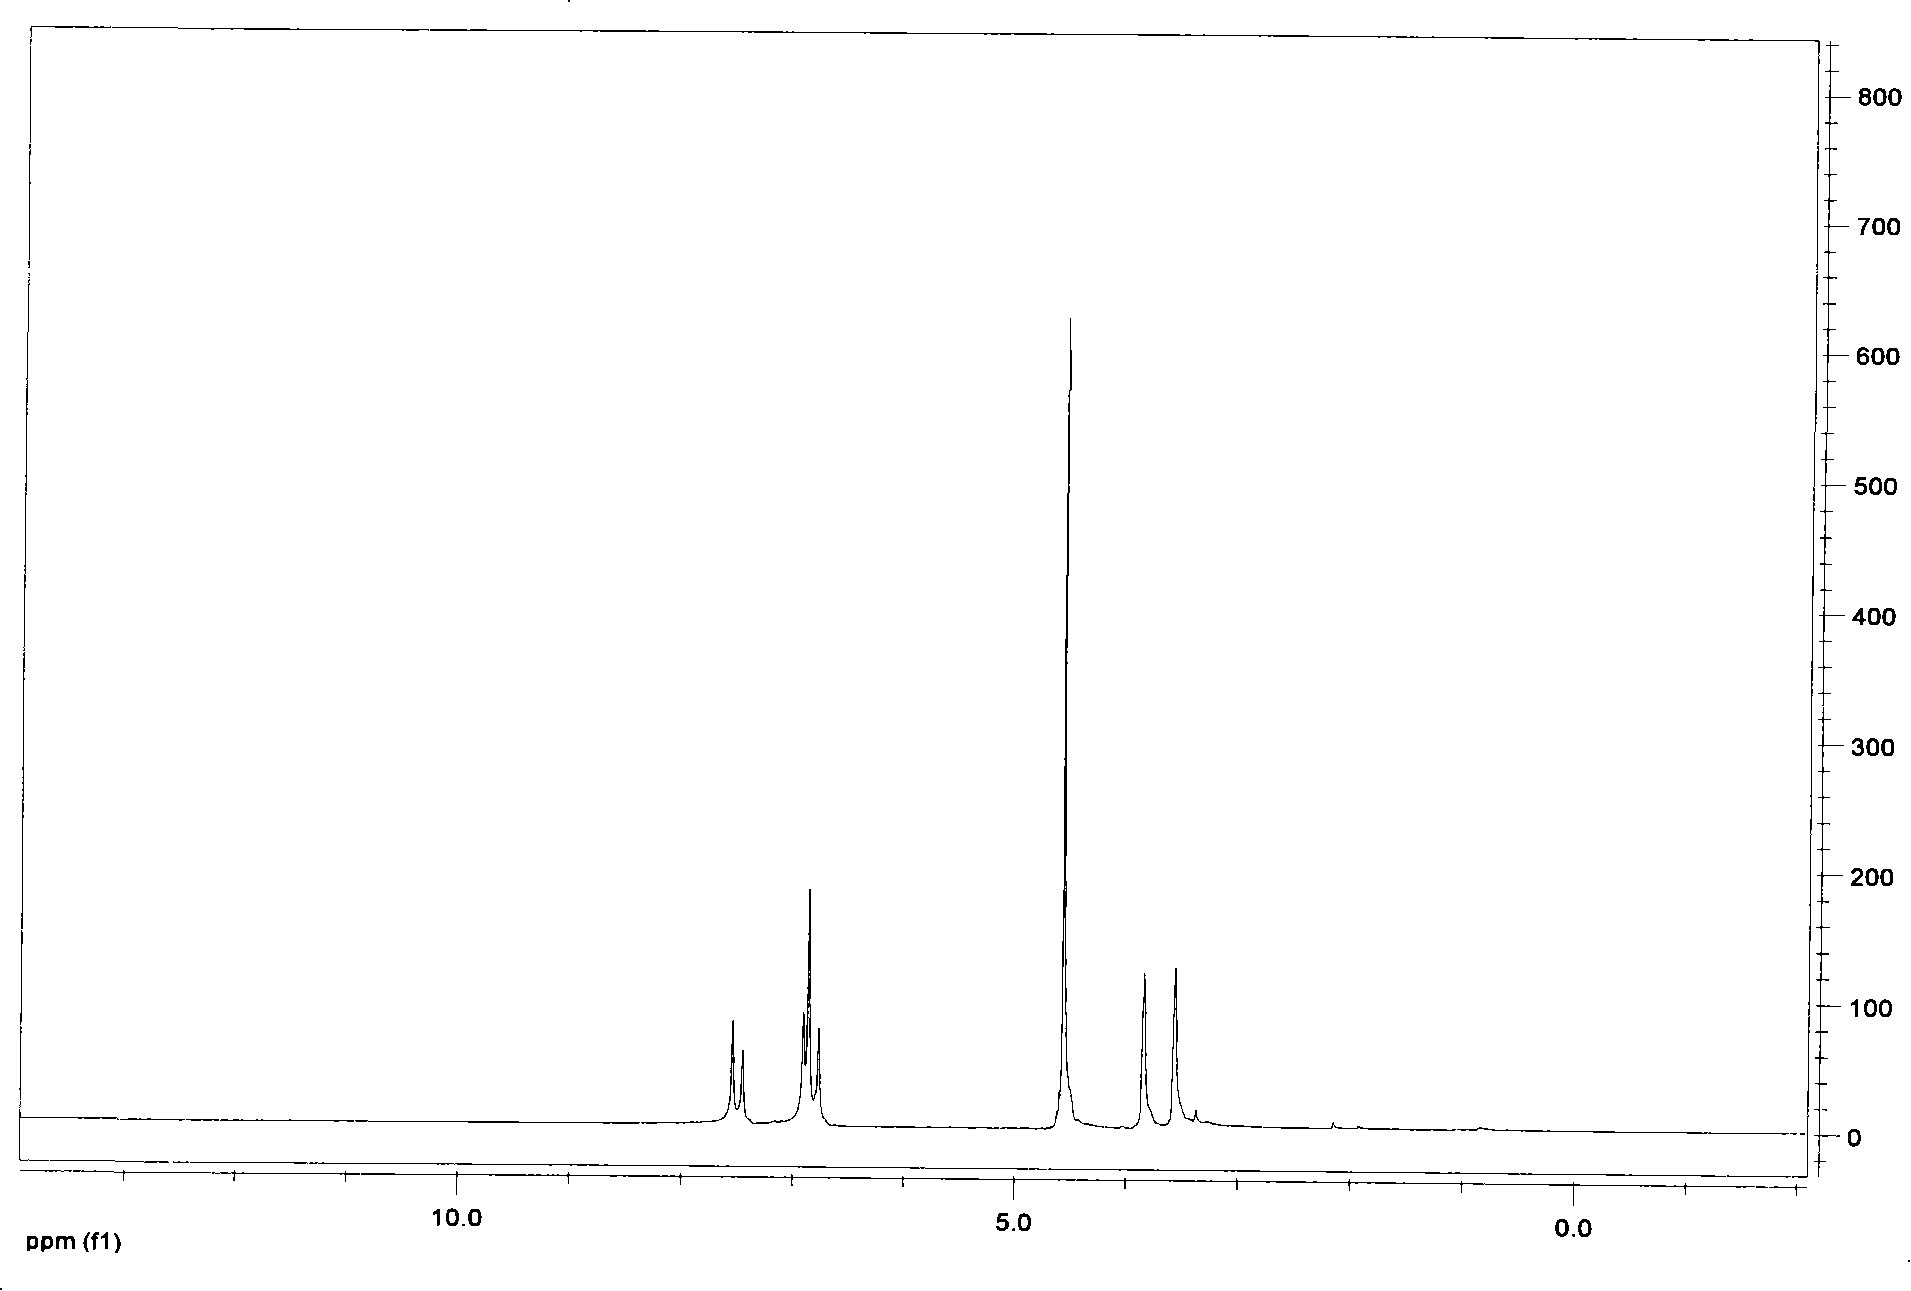 Chloride 1,3-di(2-hydroxy ethyl) imidazole ionic liquid and method for synthesizing same